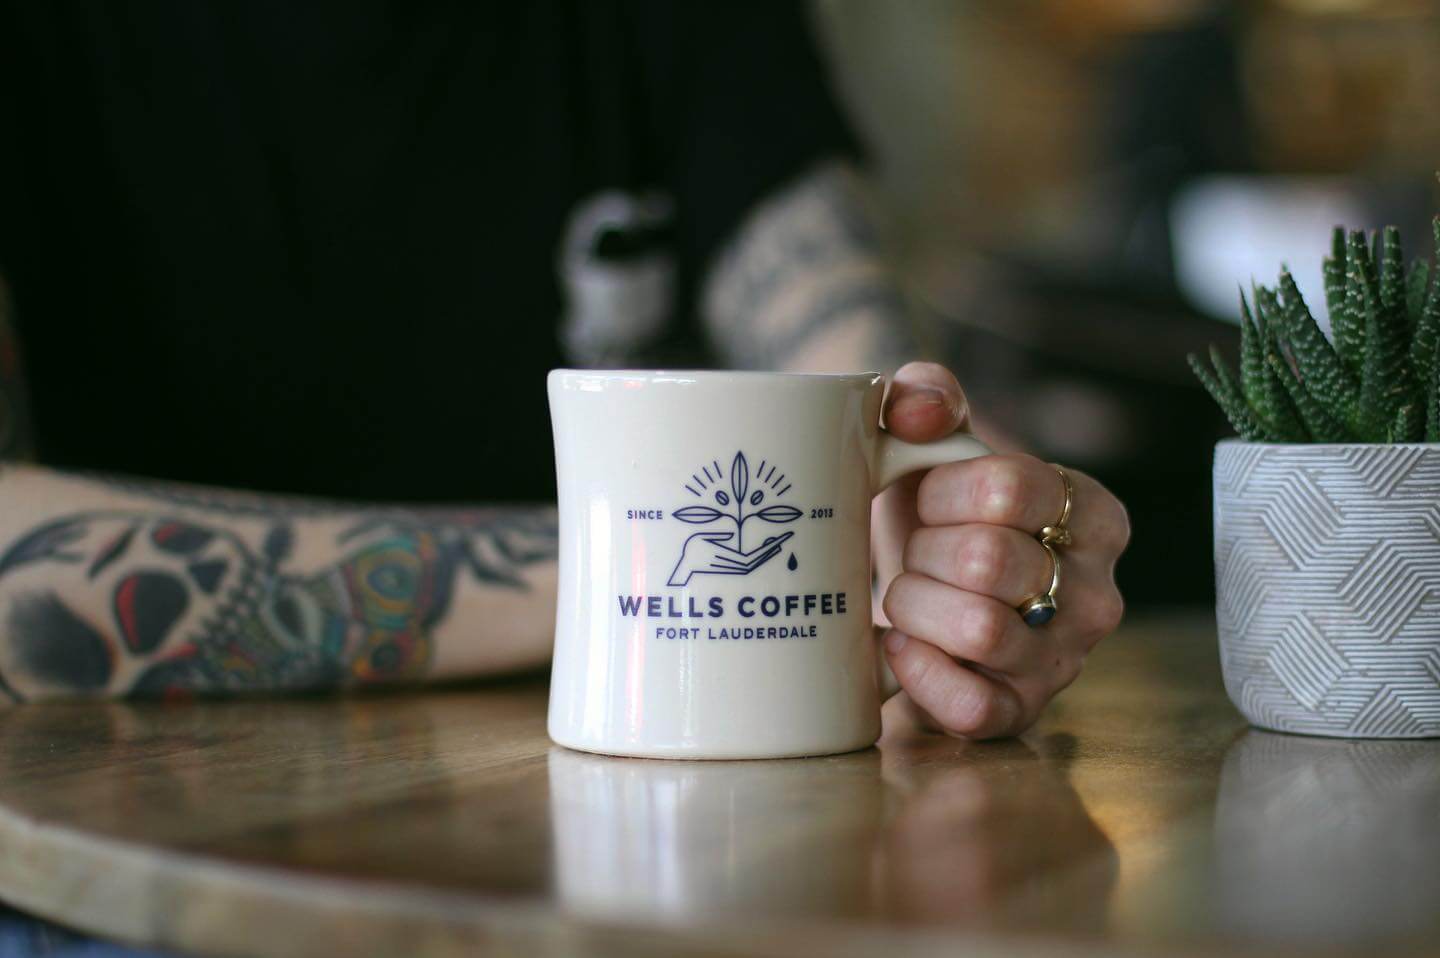 Coffee at Wells Coffee Company in Fort Lauderdale Florida